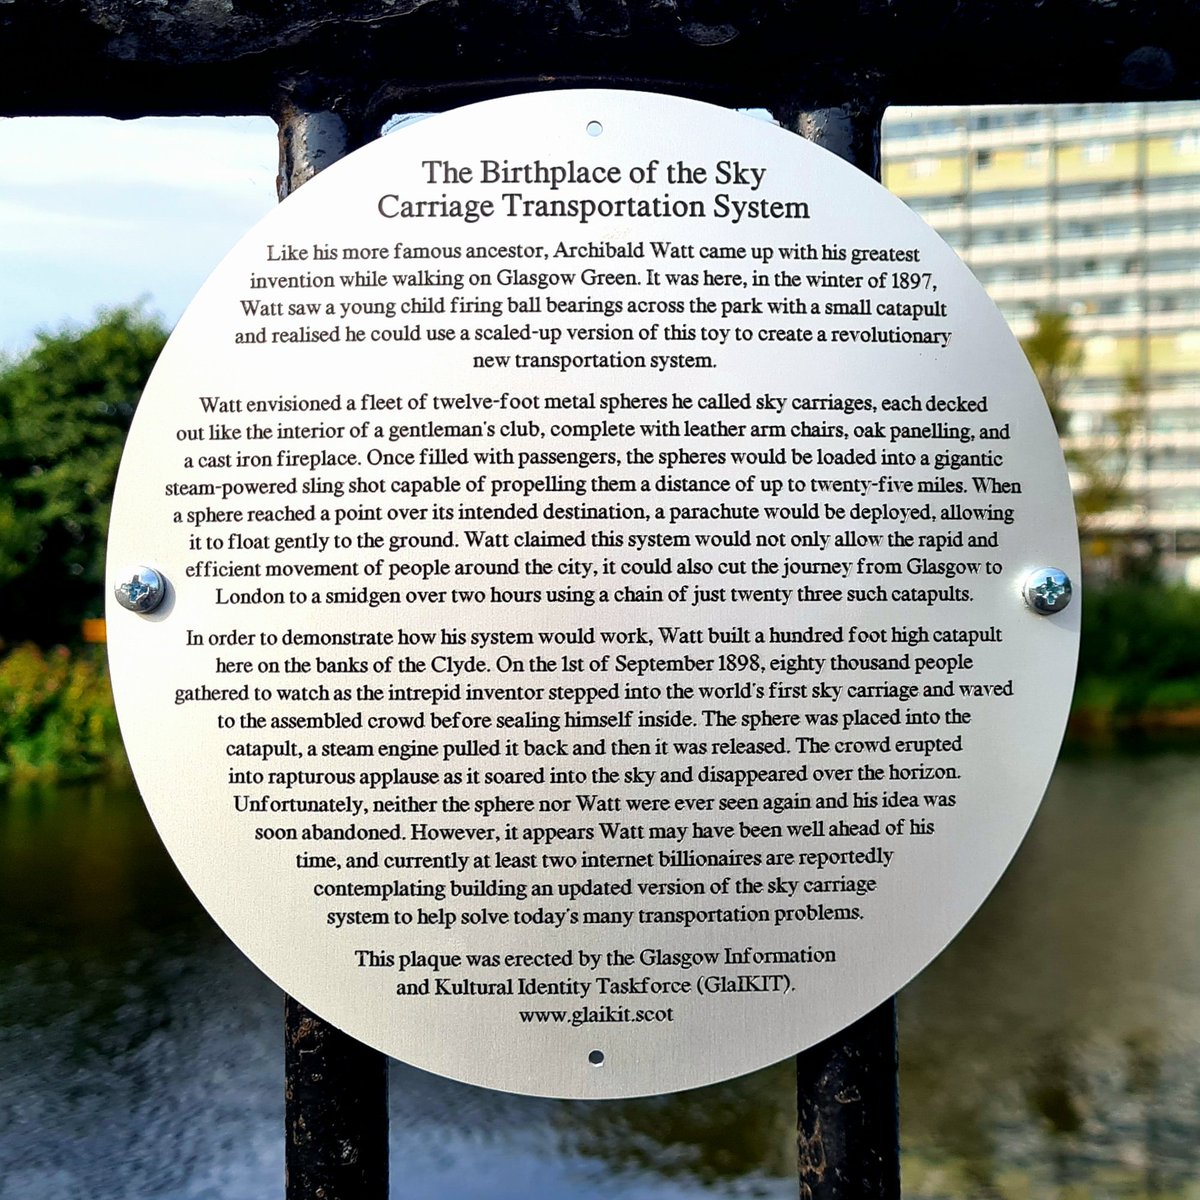 Exactly 125 years ago today, Archibald Watt tested his revolutionary new transportation system for the very first time, and we've marked the ocasion with a brand new plaque on the spot where it happened on Glasgow Green! #glasgow #glasgowhumour #glaikit #glasgowgreen #humour